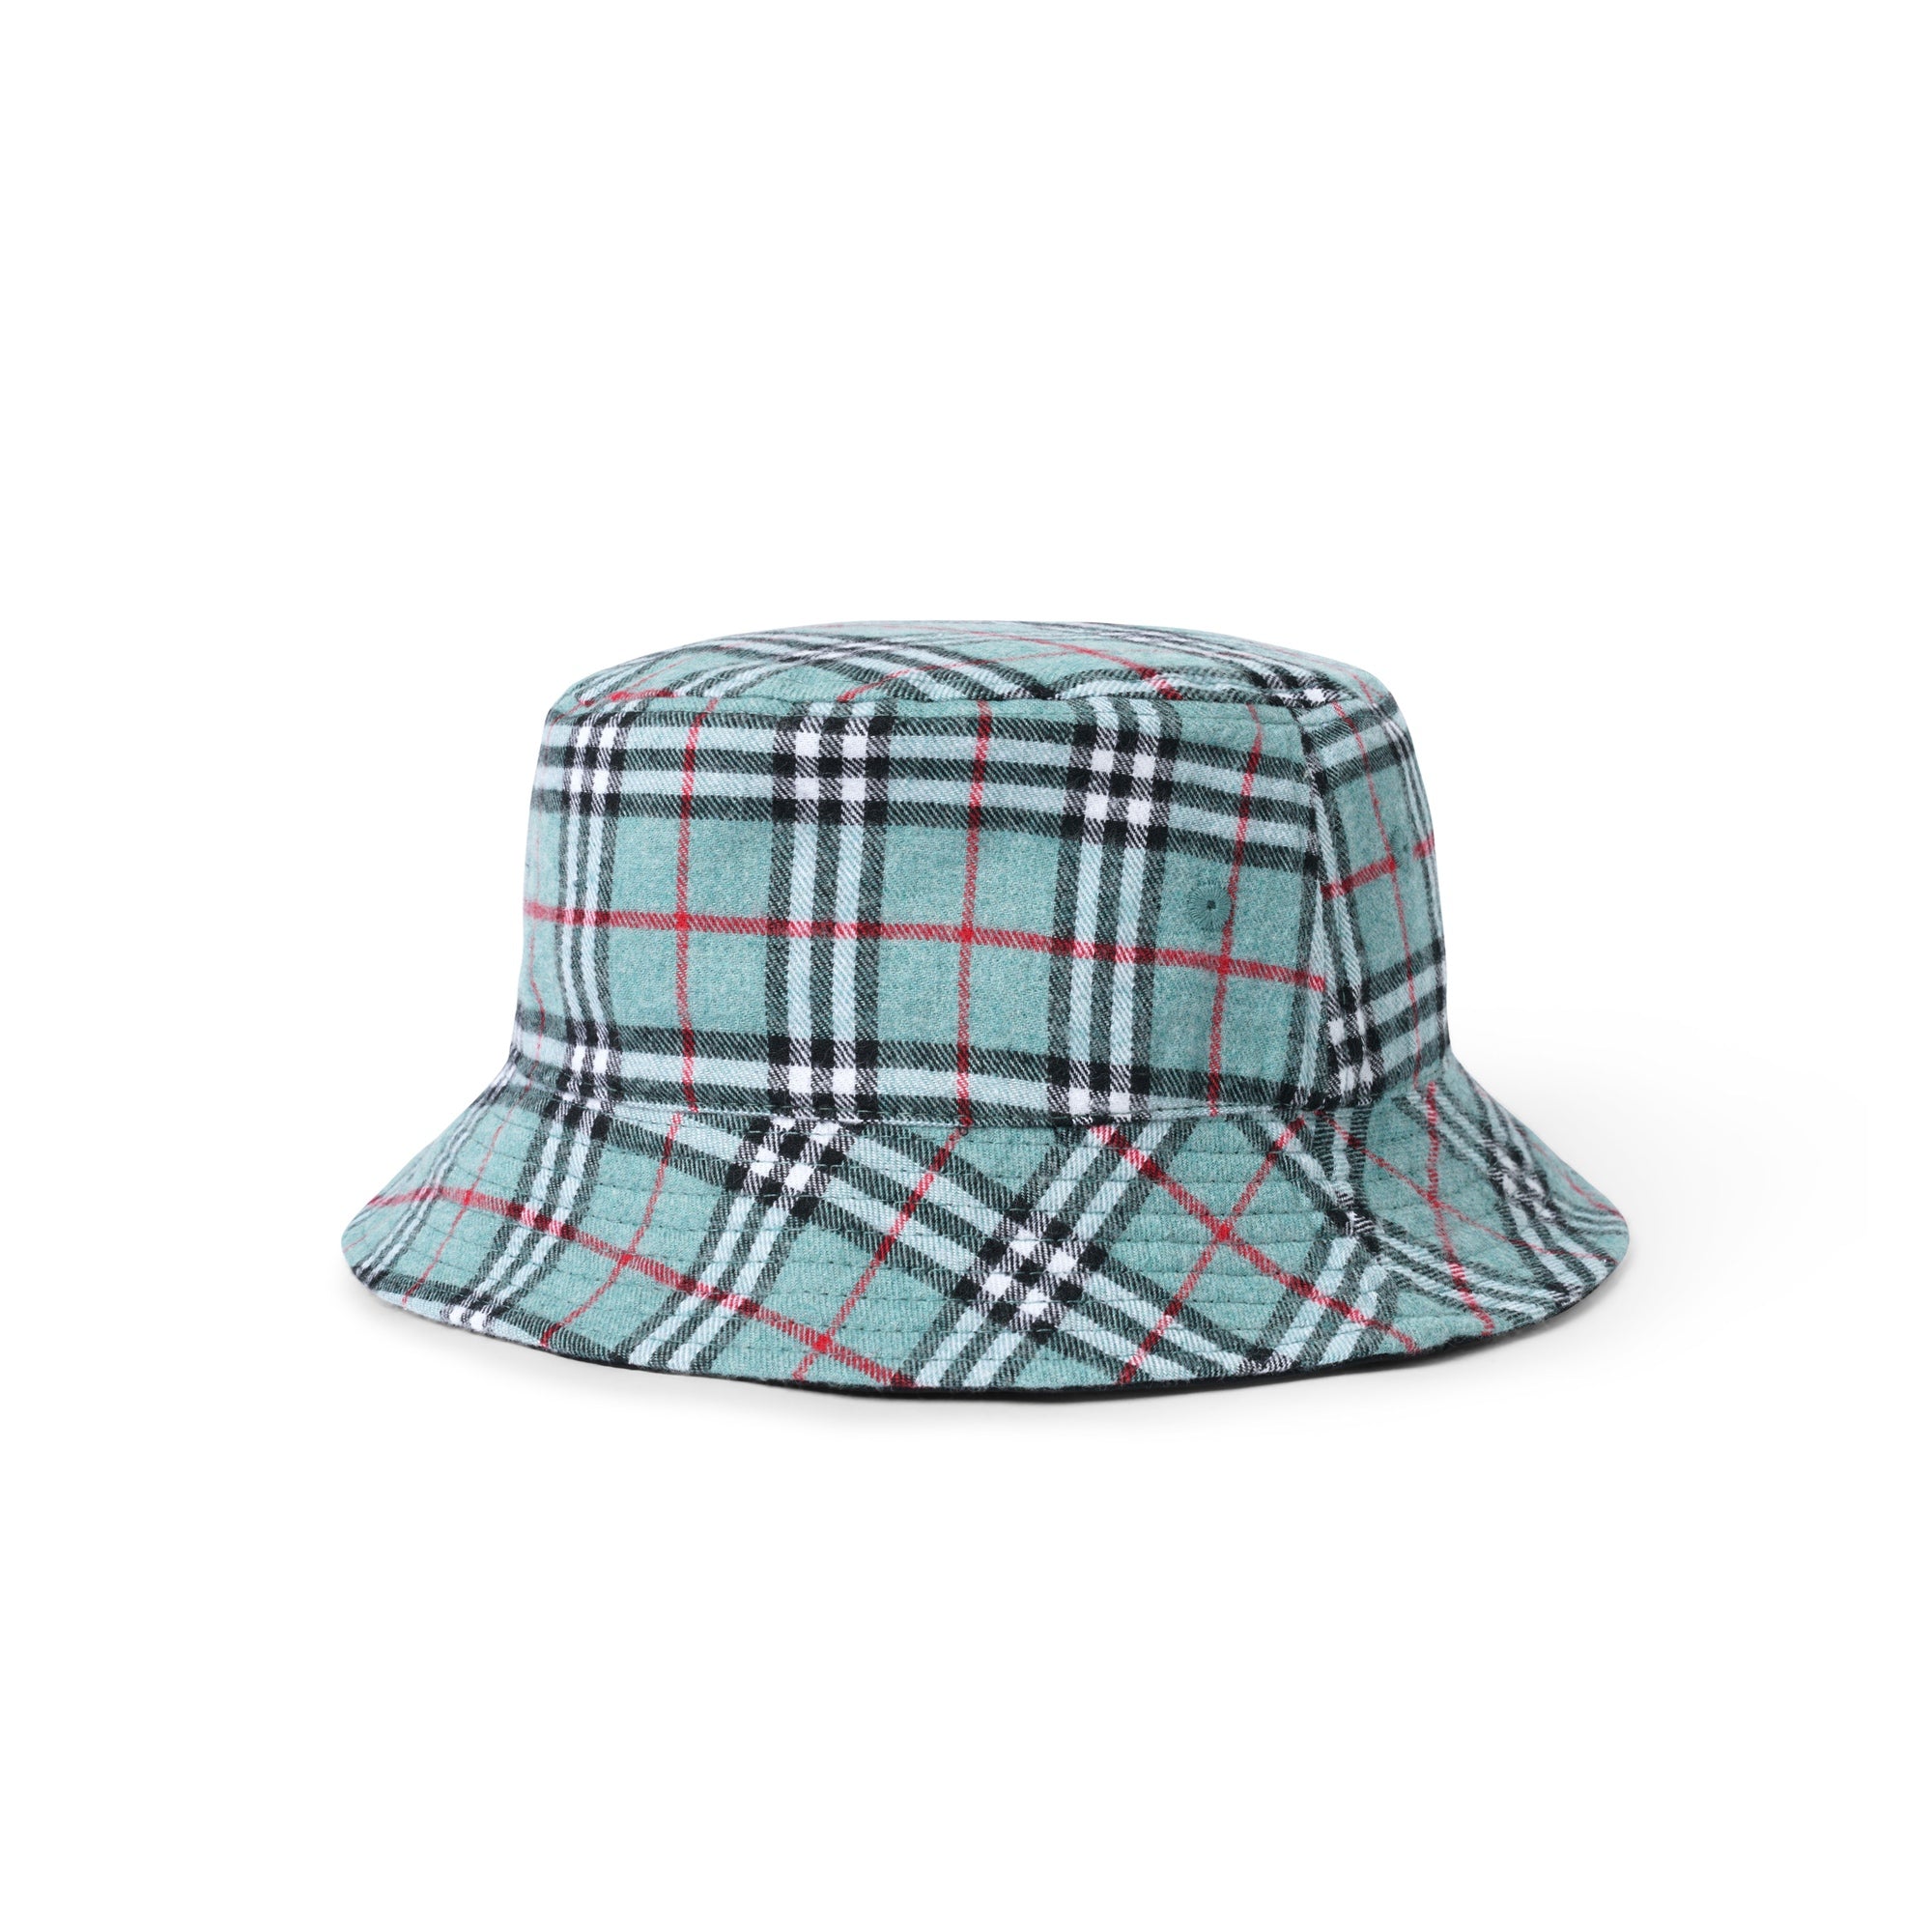 Butter Goods Plaid Reversible Bucket Hat Navy/Forest/White L/XL